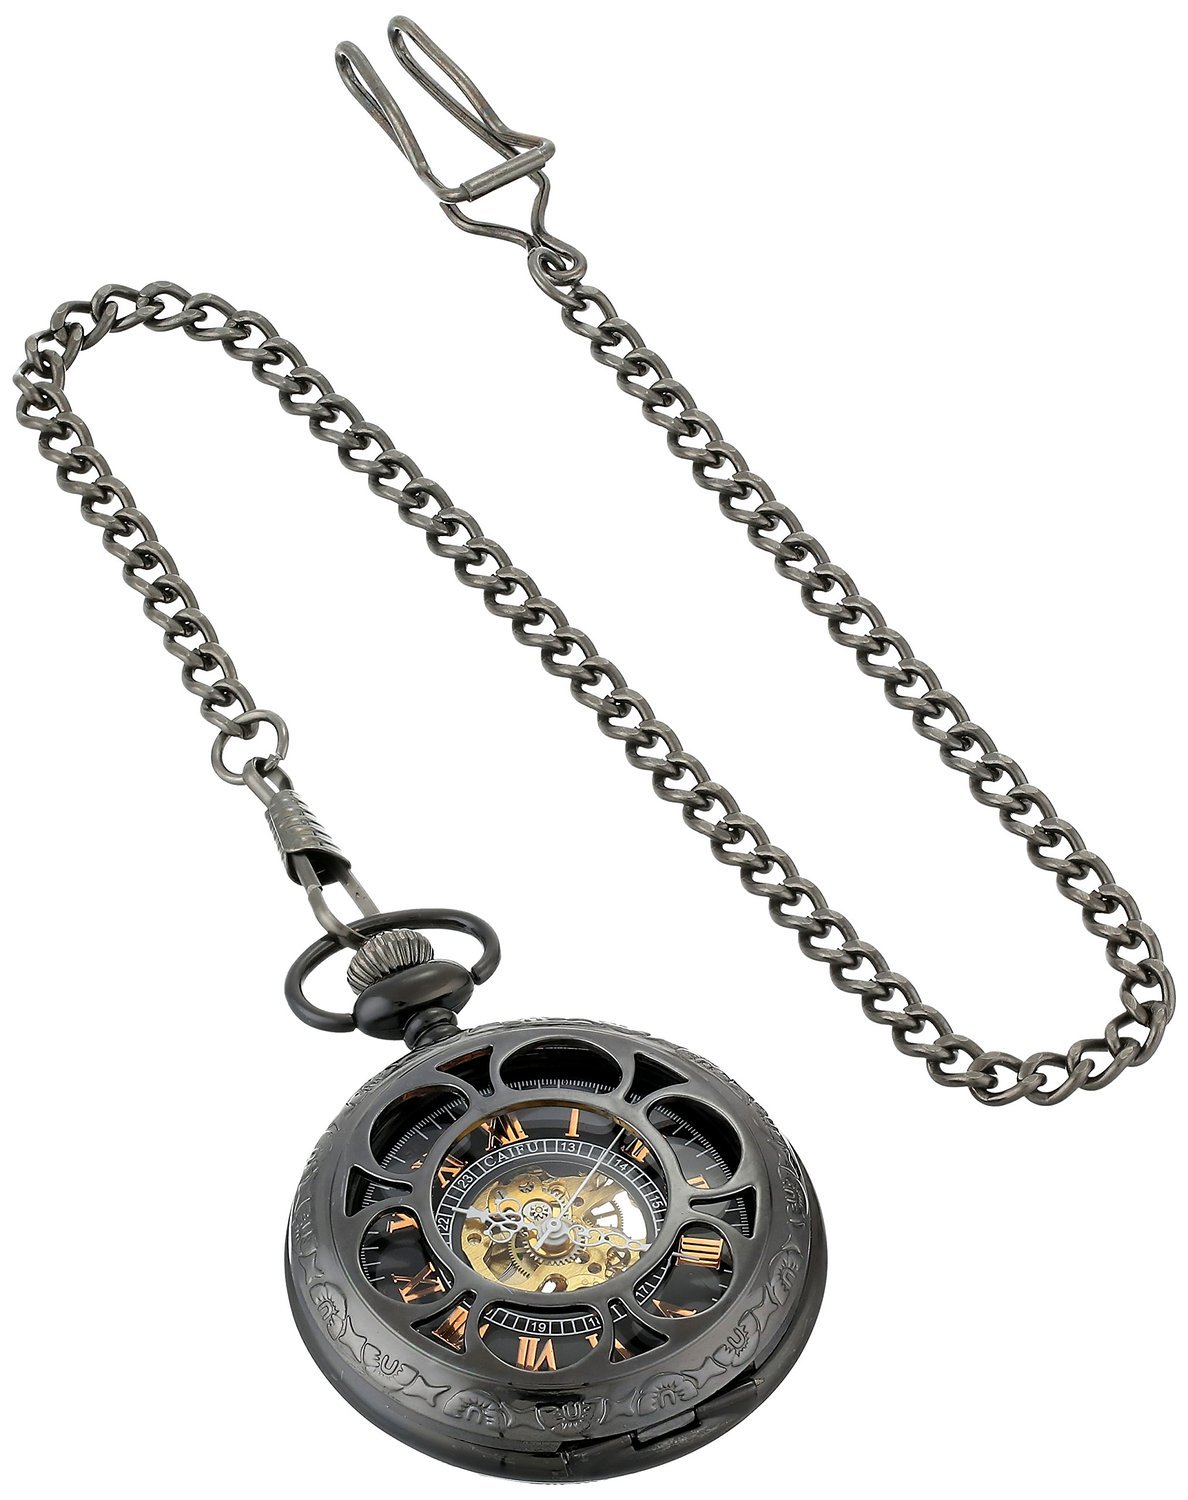 ShoppeWatch Men’s Pocket Watch with Chain | Hand Winding Vintage Pocket Watch | Classic Mechanical Movement Pocketwatch | 1920s Railroad Steampunk Costume Accessory